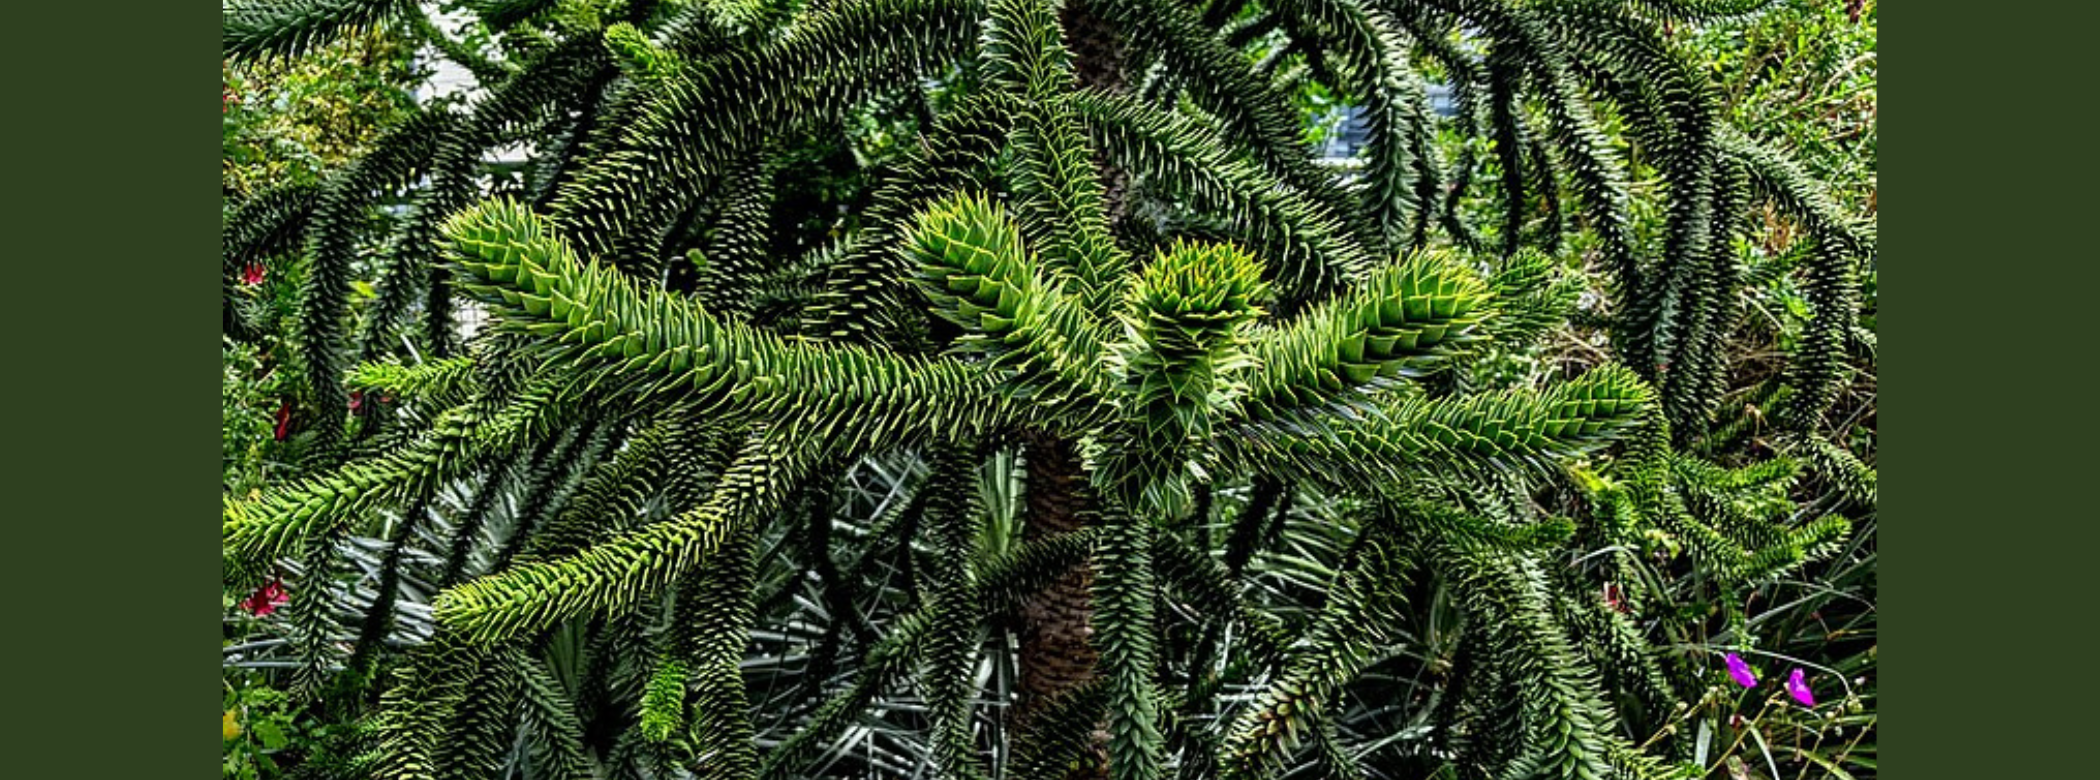 A close-up on several monkey puzzle tree branches covered in small green, spiky, stiff, leathery, glossy and triangular-shaped leaves.